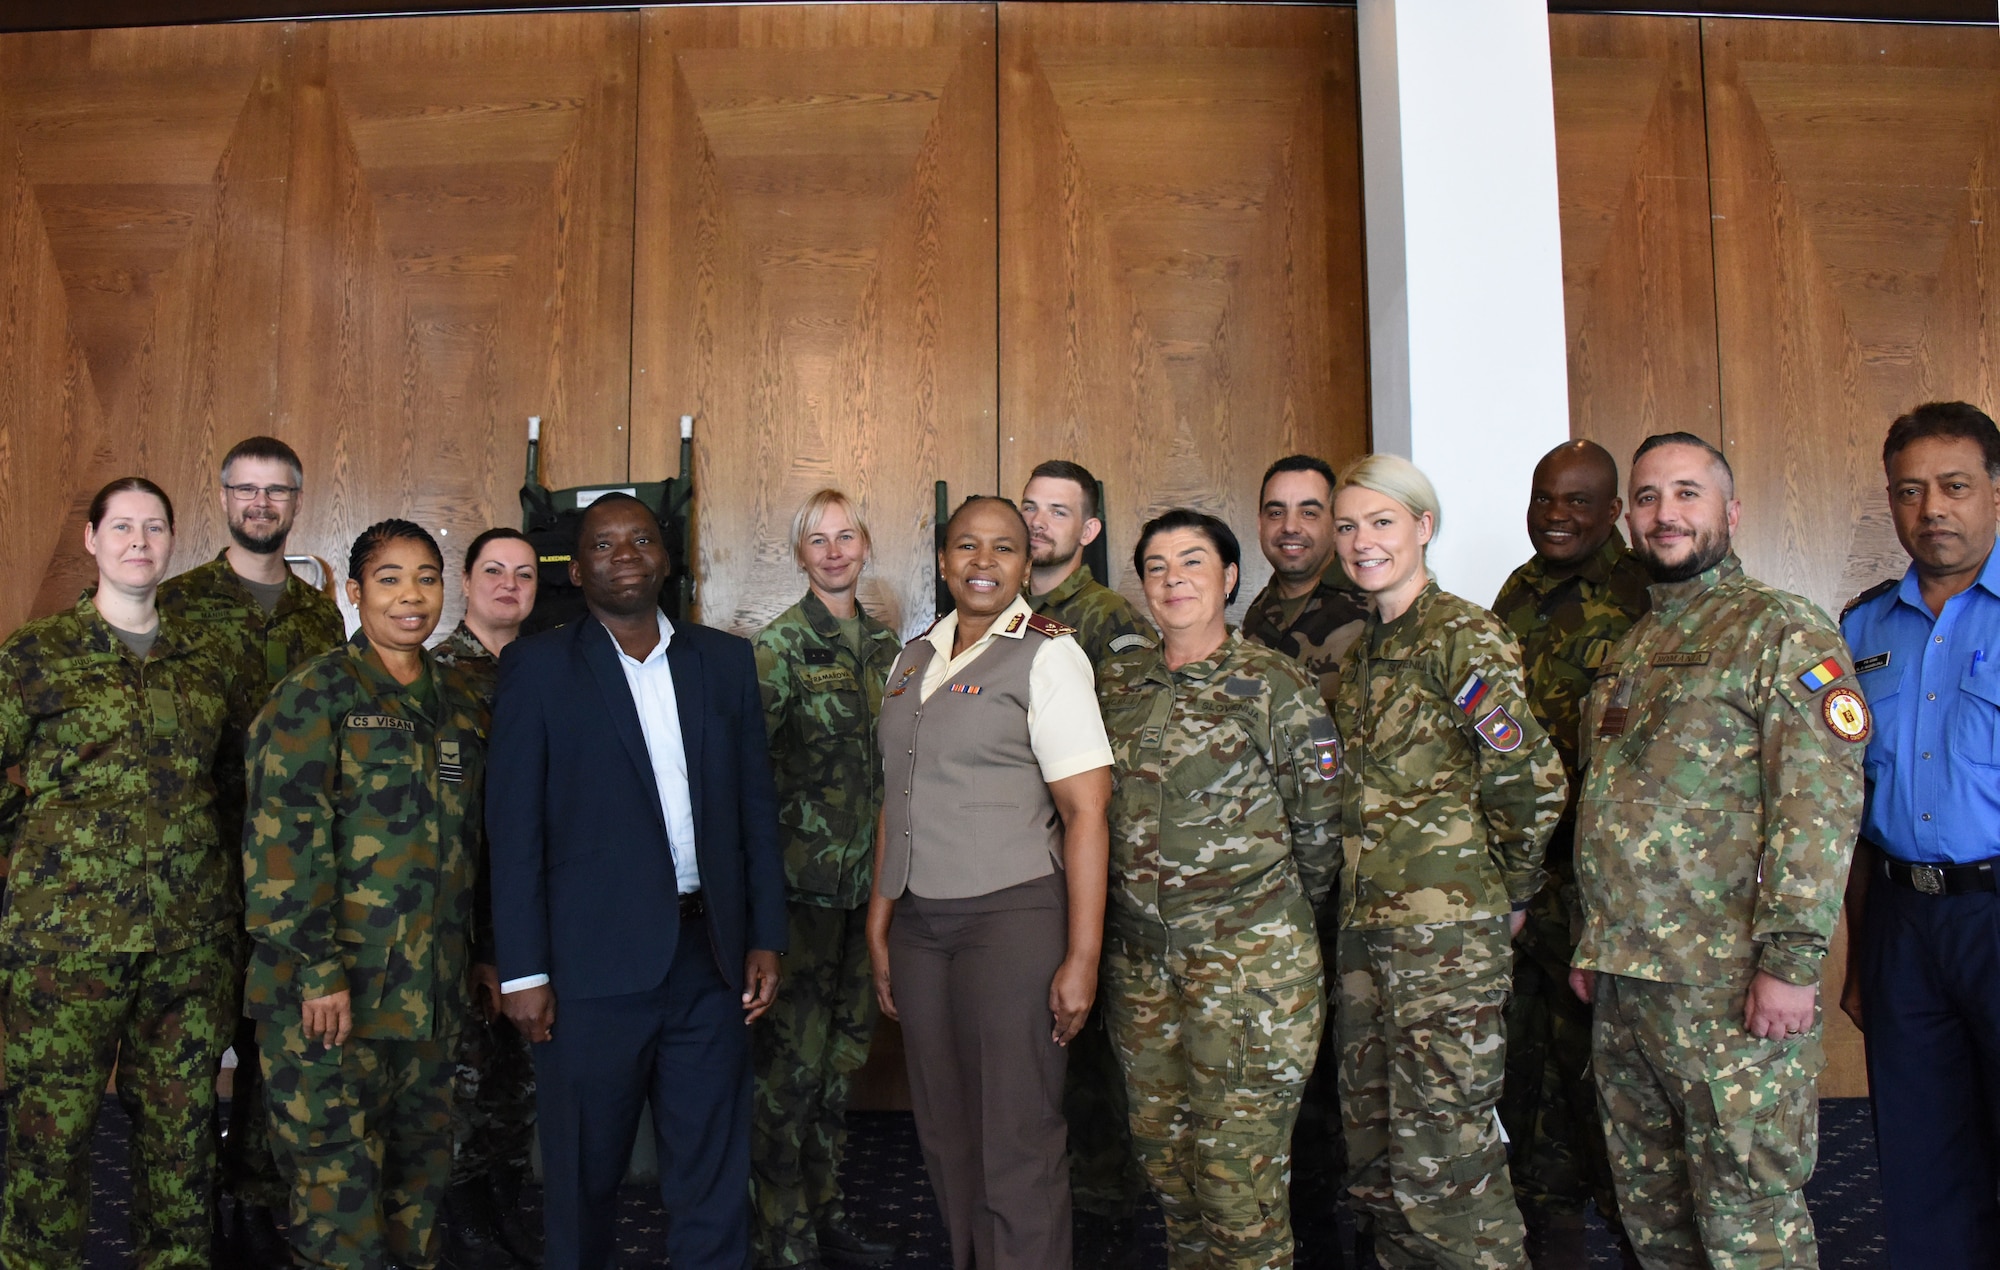 Delegates from Botswana, Czech Republic, Estonia, Germany, Mauritius, Morocco, Nigeria, North Macedonia, Romania, Slovenia, South Africa, and Tanzania pose for a picture during U.S. Air Forces in Europe - Air Forces Africa’s European-African Military Nursing Exchange conference at Ramstein Air Base, Germany, May 10, 2022.